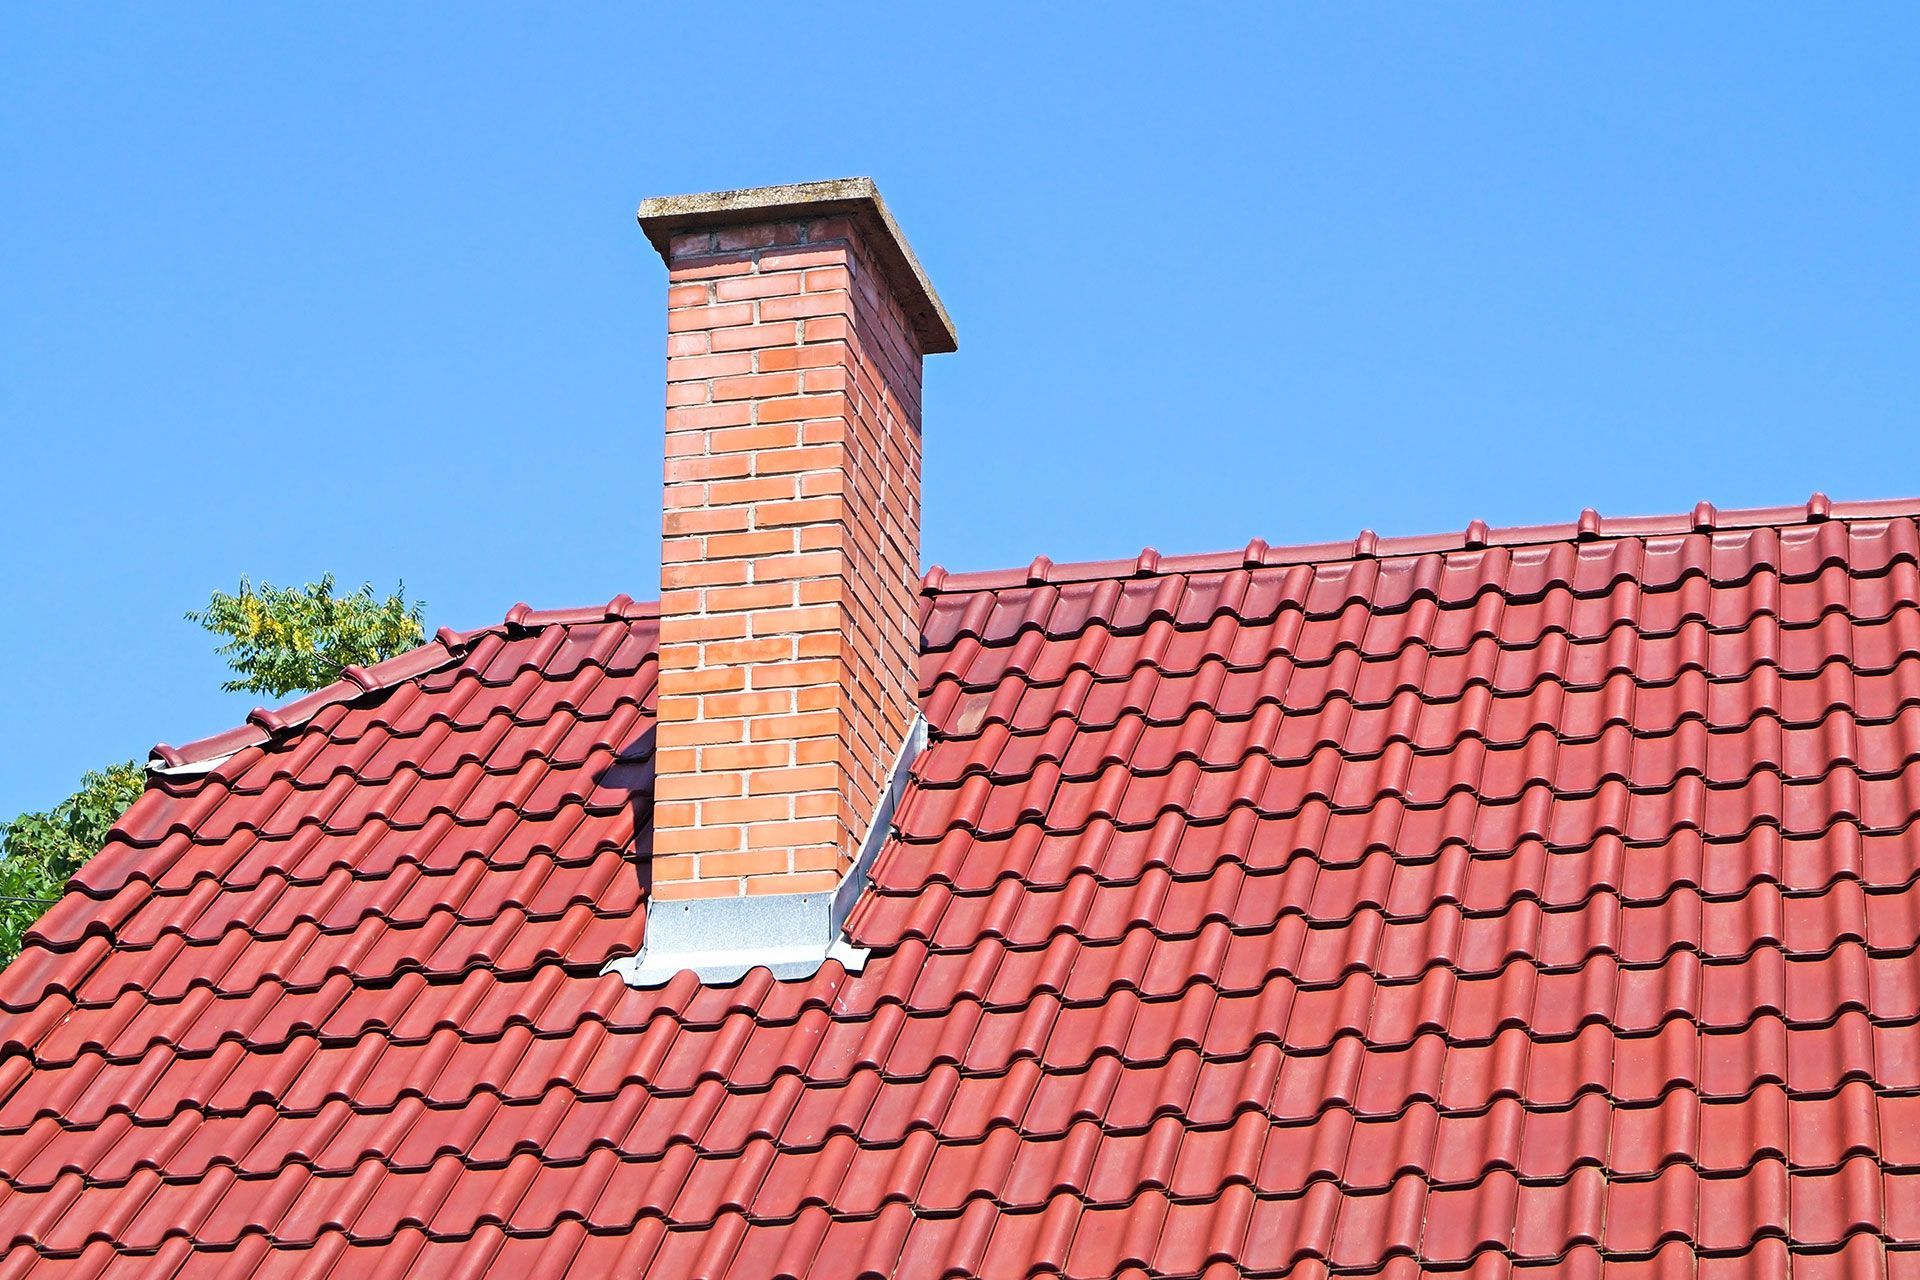 A brick chimney on top of a red tiled roof